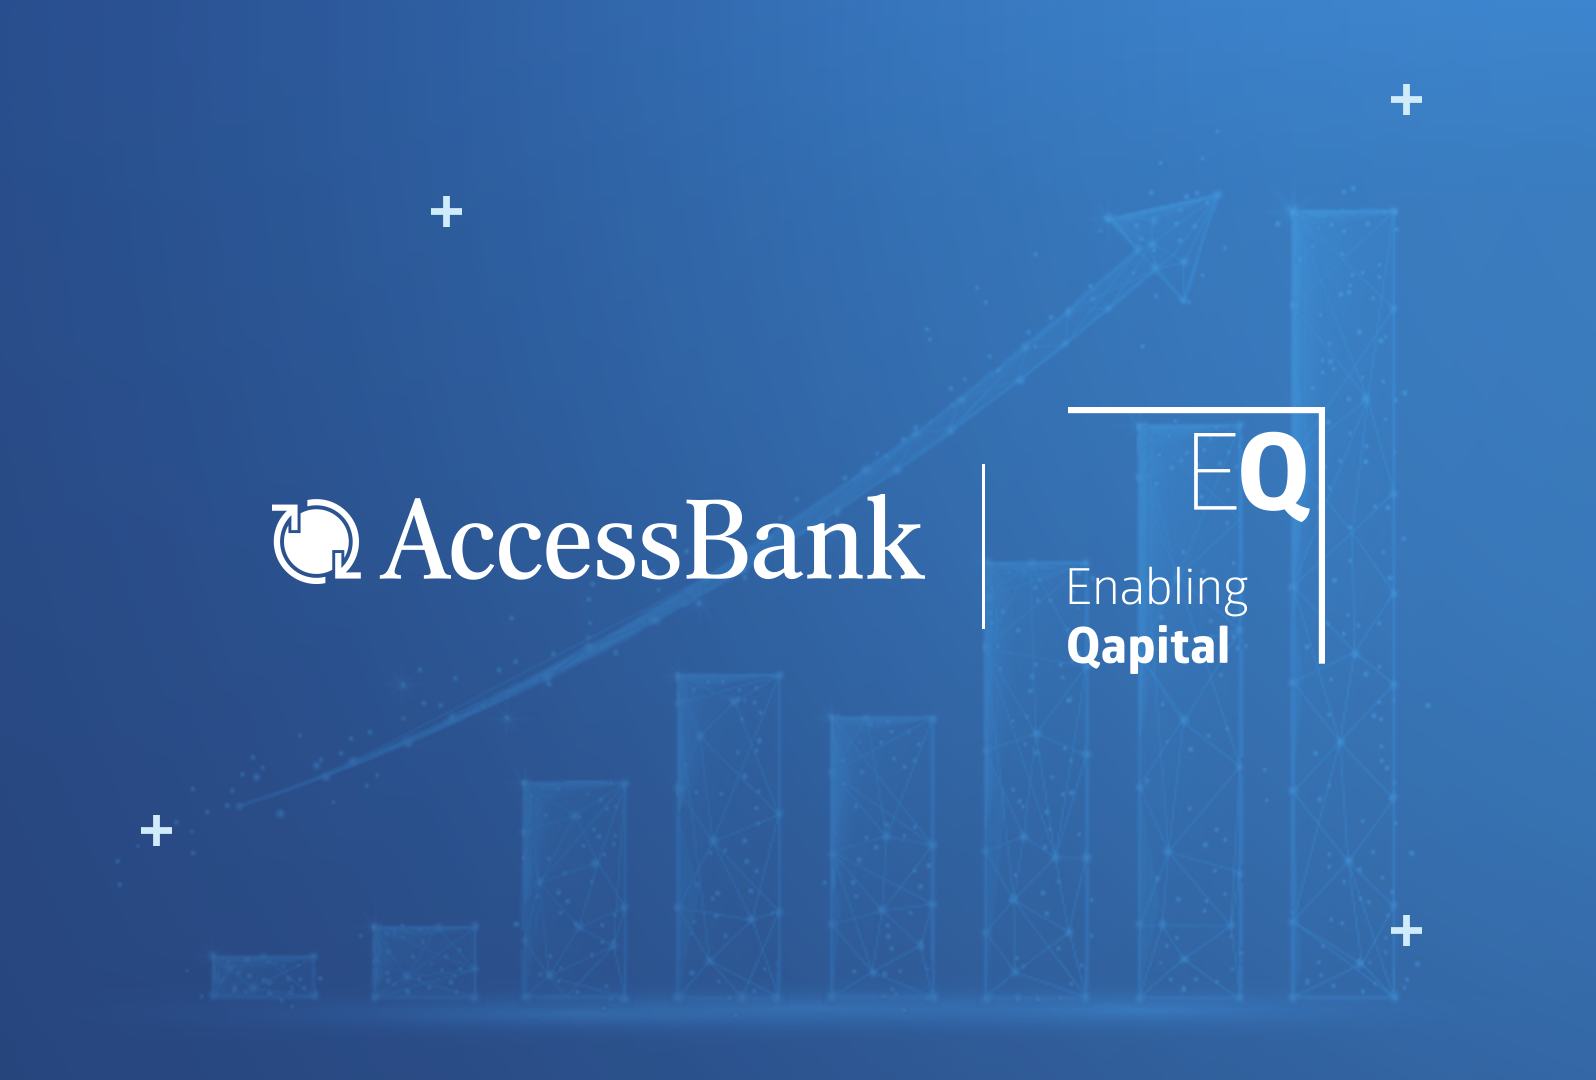 AccessBank signed a credit agreement with Enabling Qapital Ltd